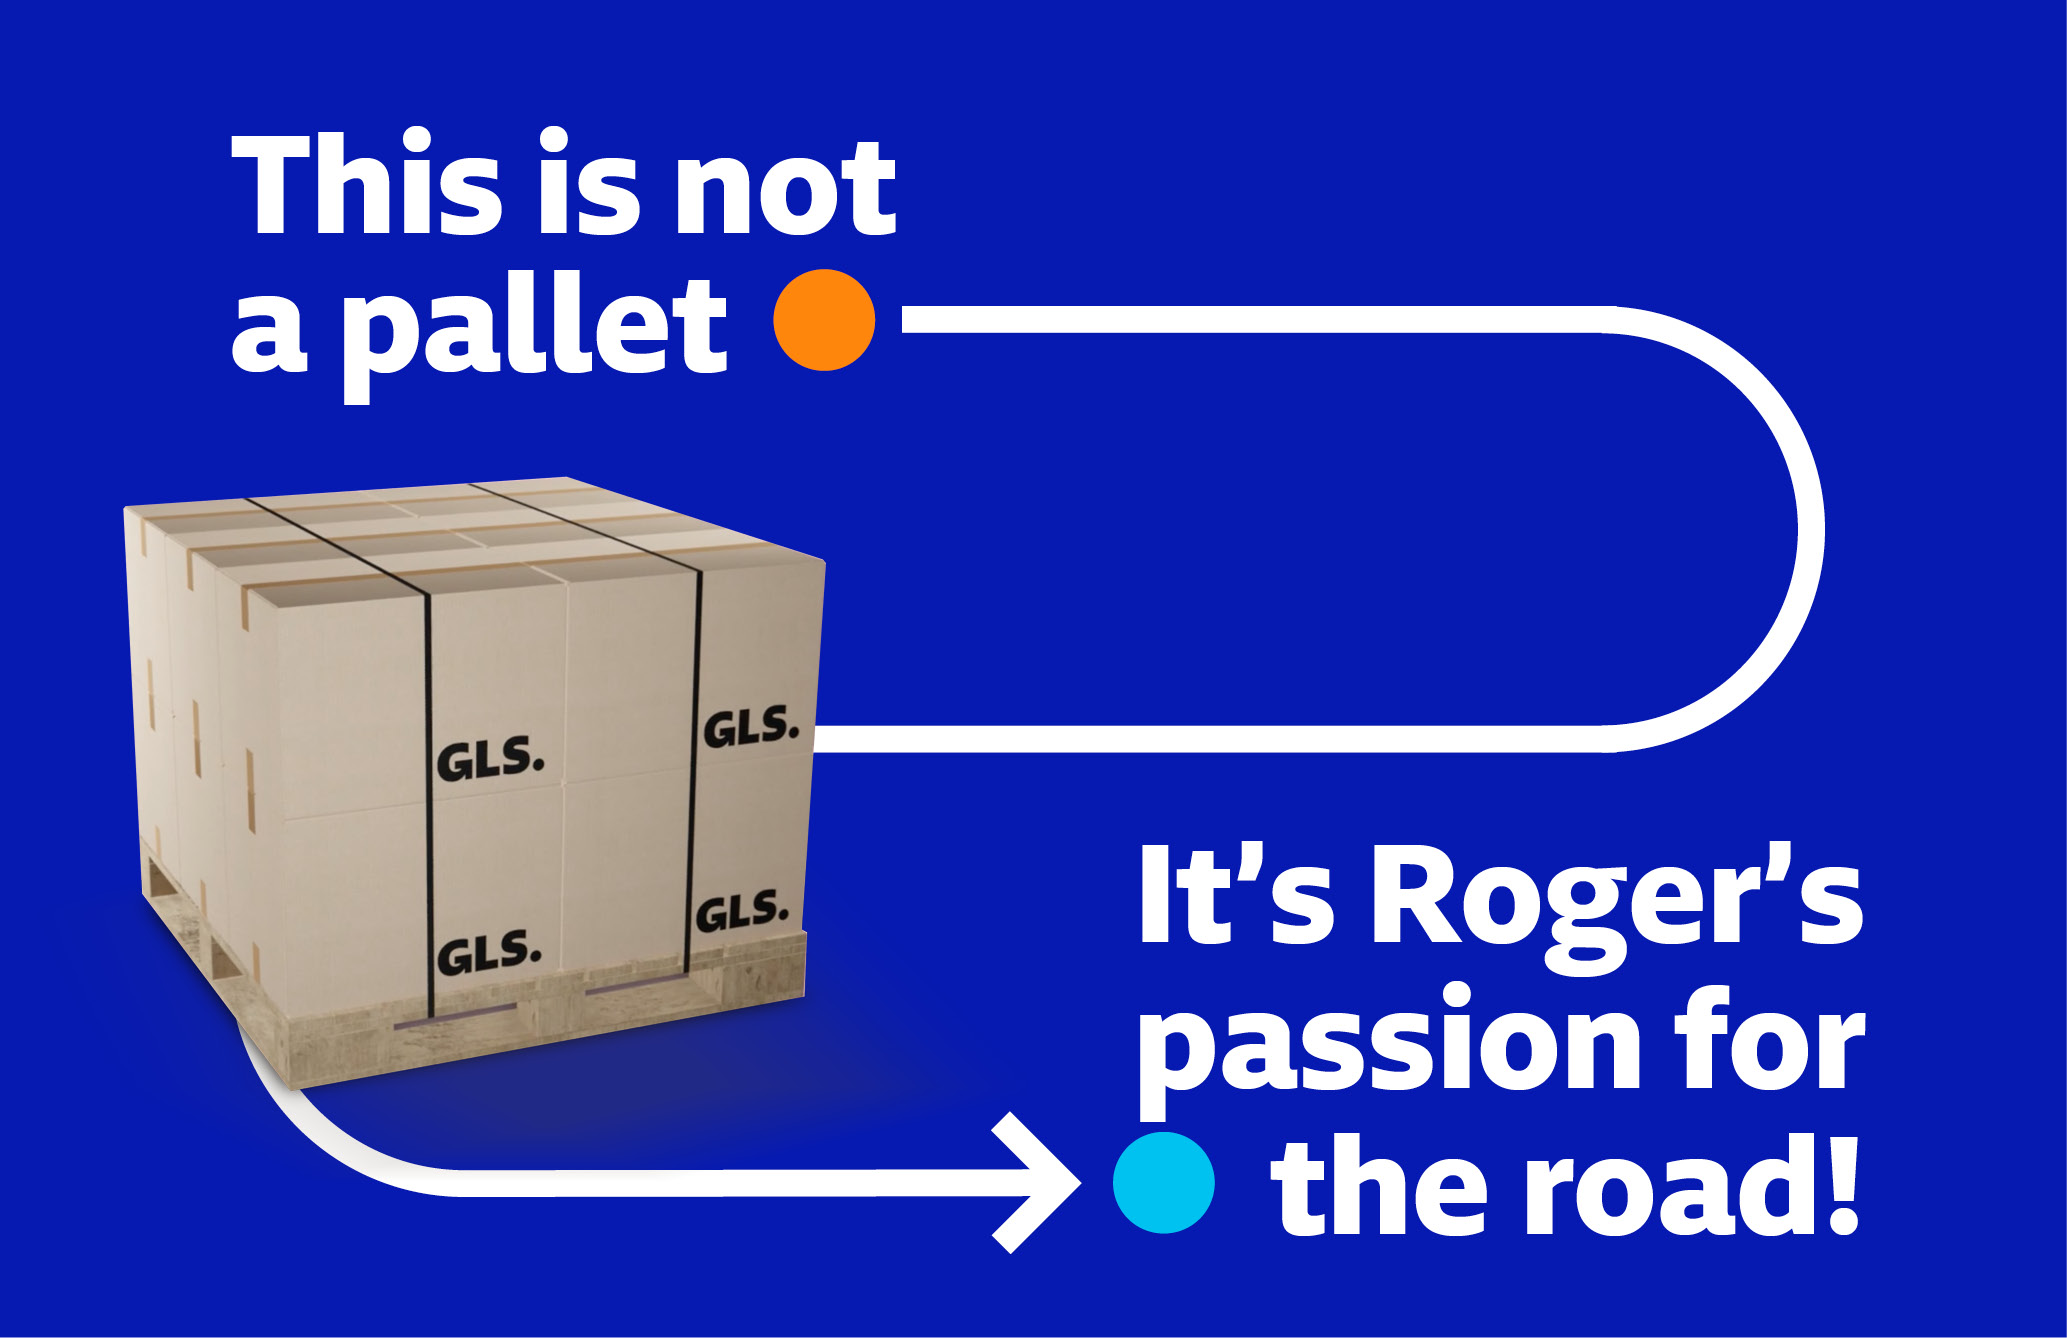 This is not a pallet, it’s Roger’s passion